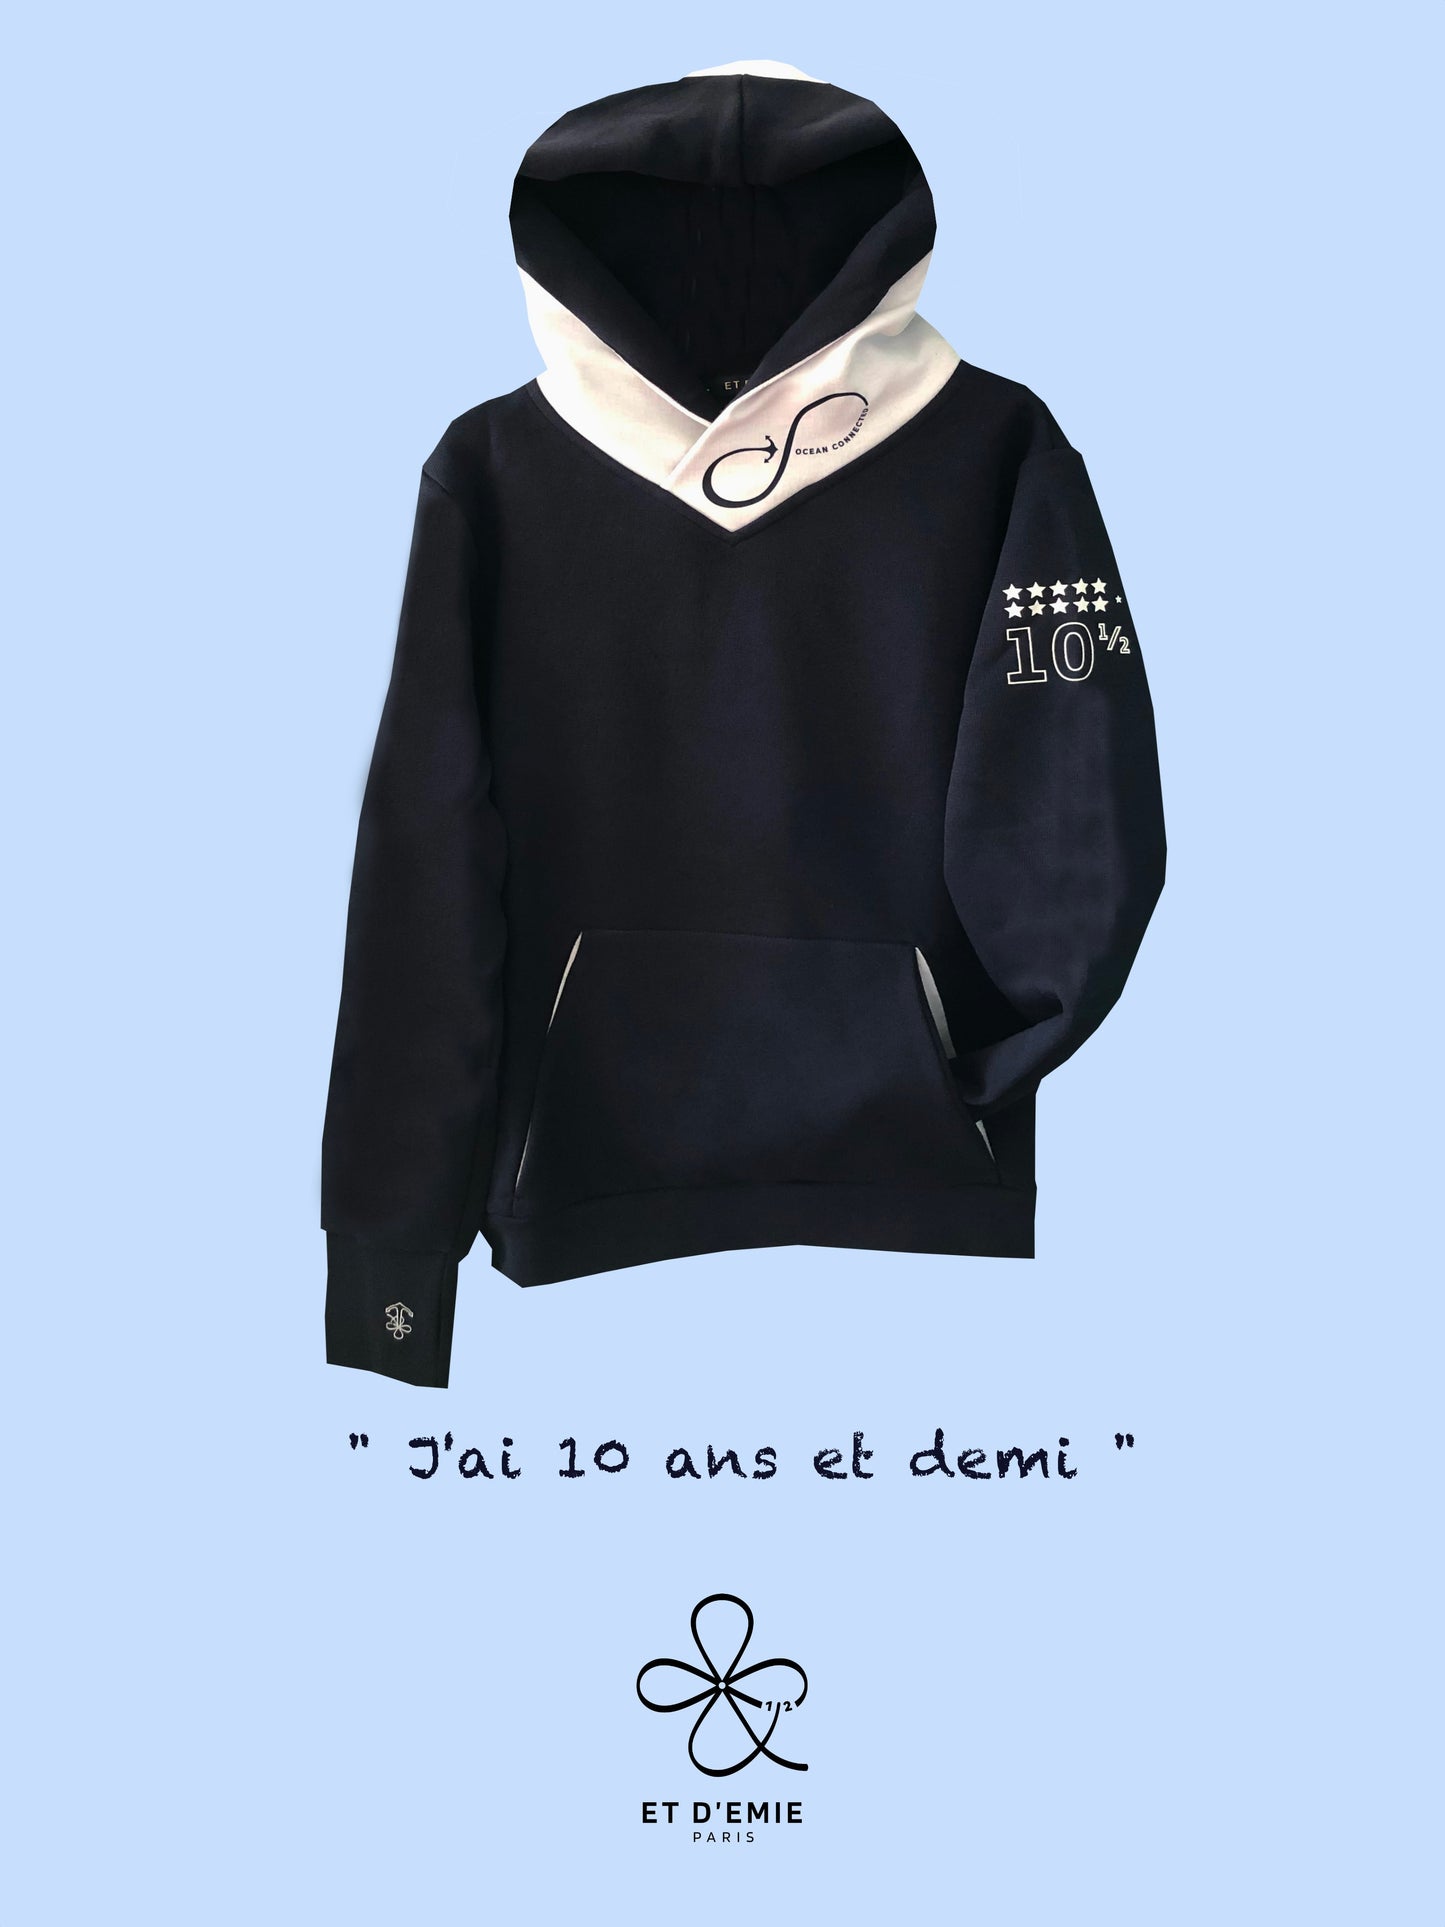 Hoody OCEAN CONNECTED "I'm 10 and a half years old" in navy organic cotton and white seaqual 🇫🇷